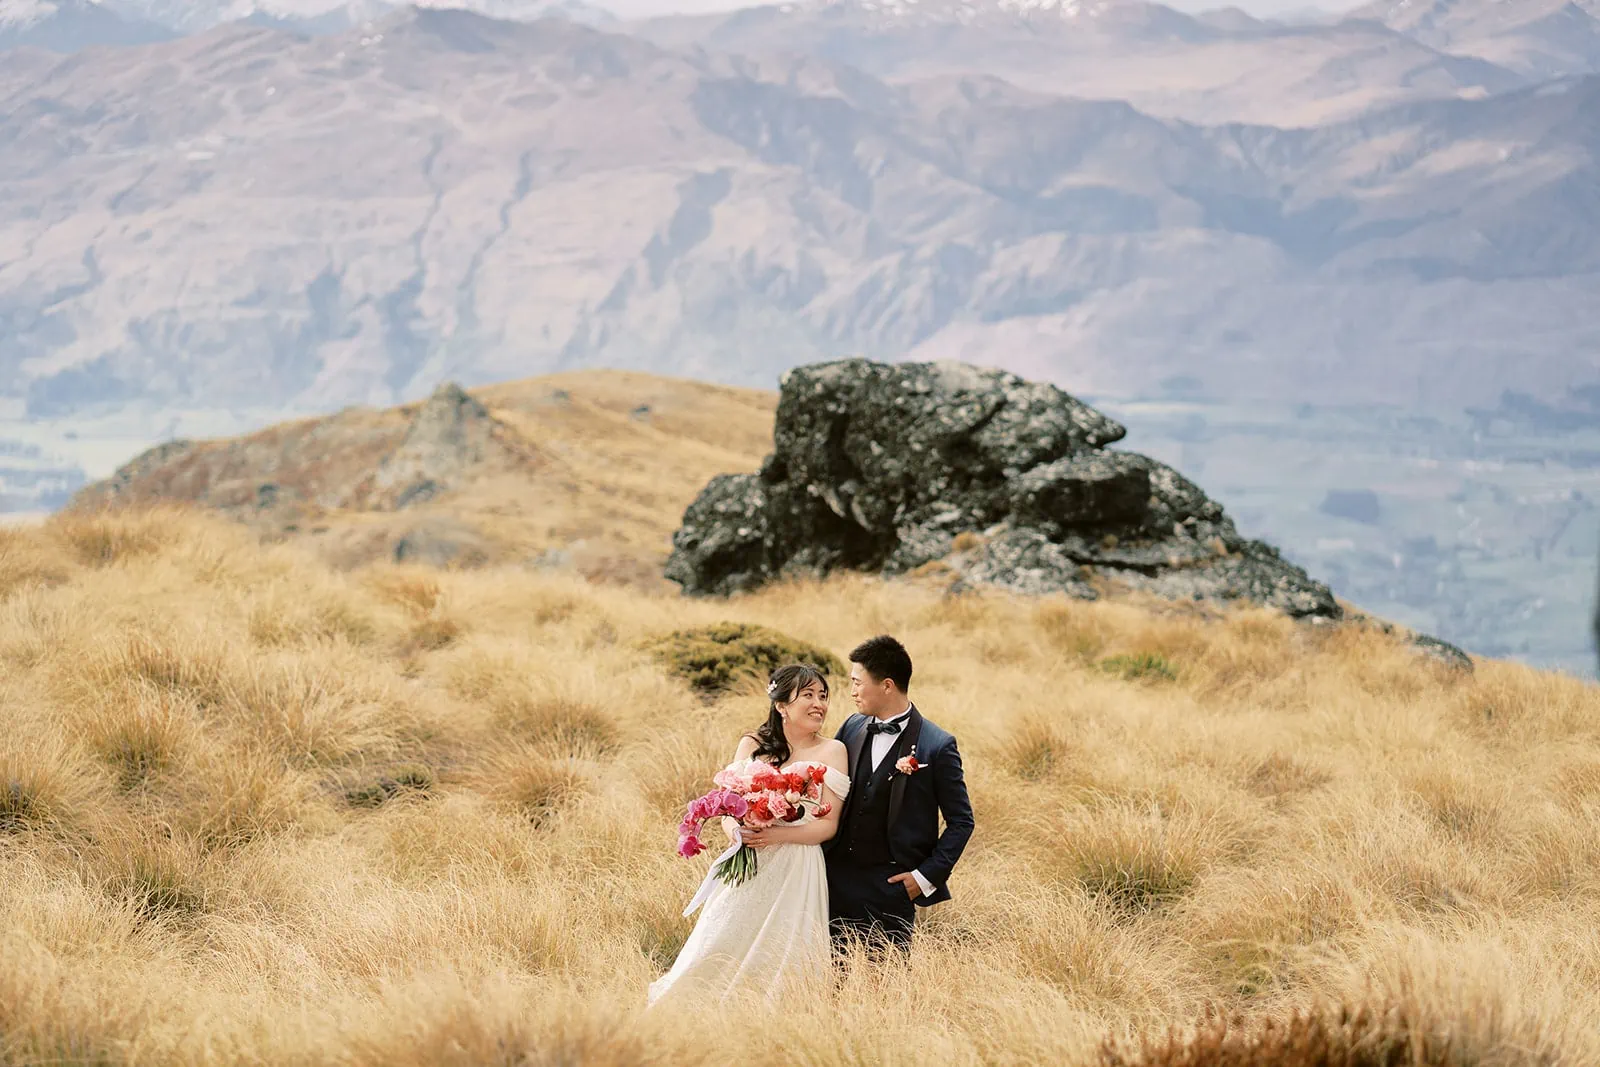 Queenstown Elopement Heli Wedding Photographer クイーンズタウン結婚式 | A bride and groom posing during their pre-wedding photoshoot on a grassy hill in New Zealand.